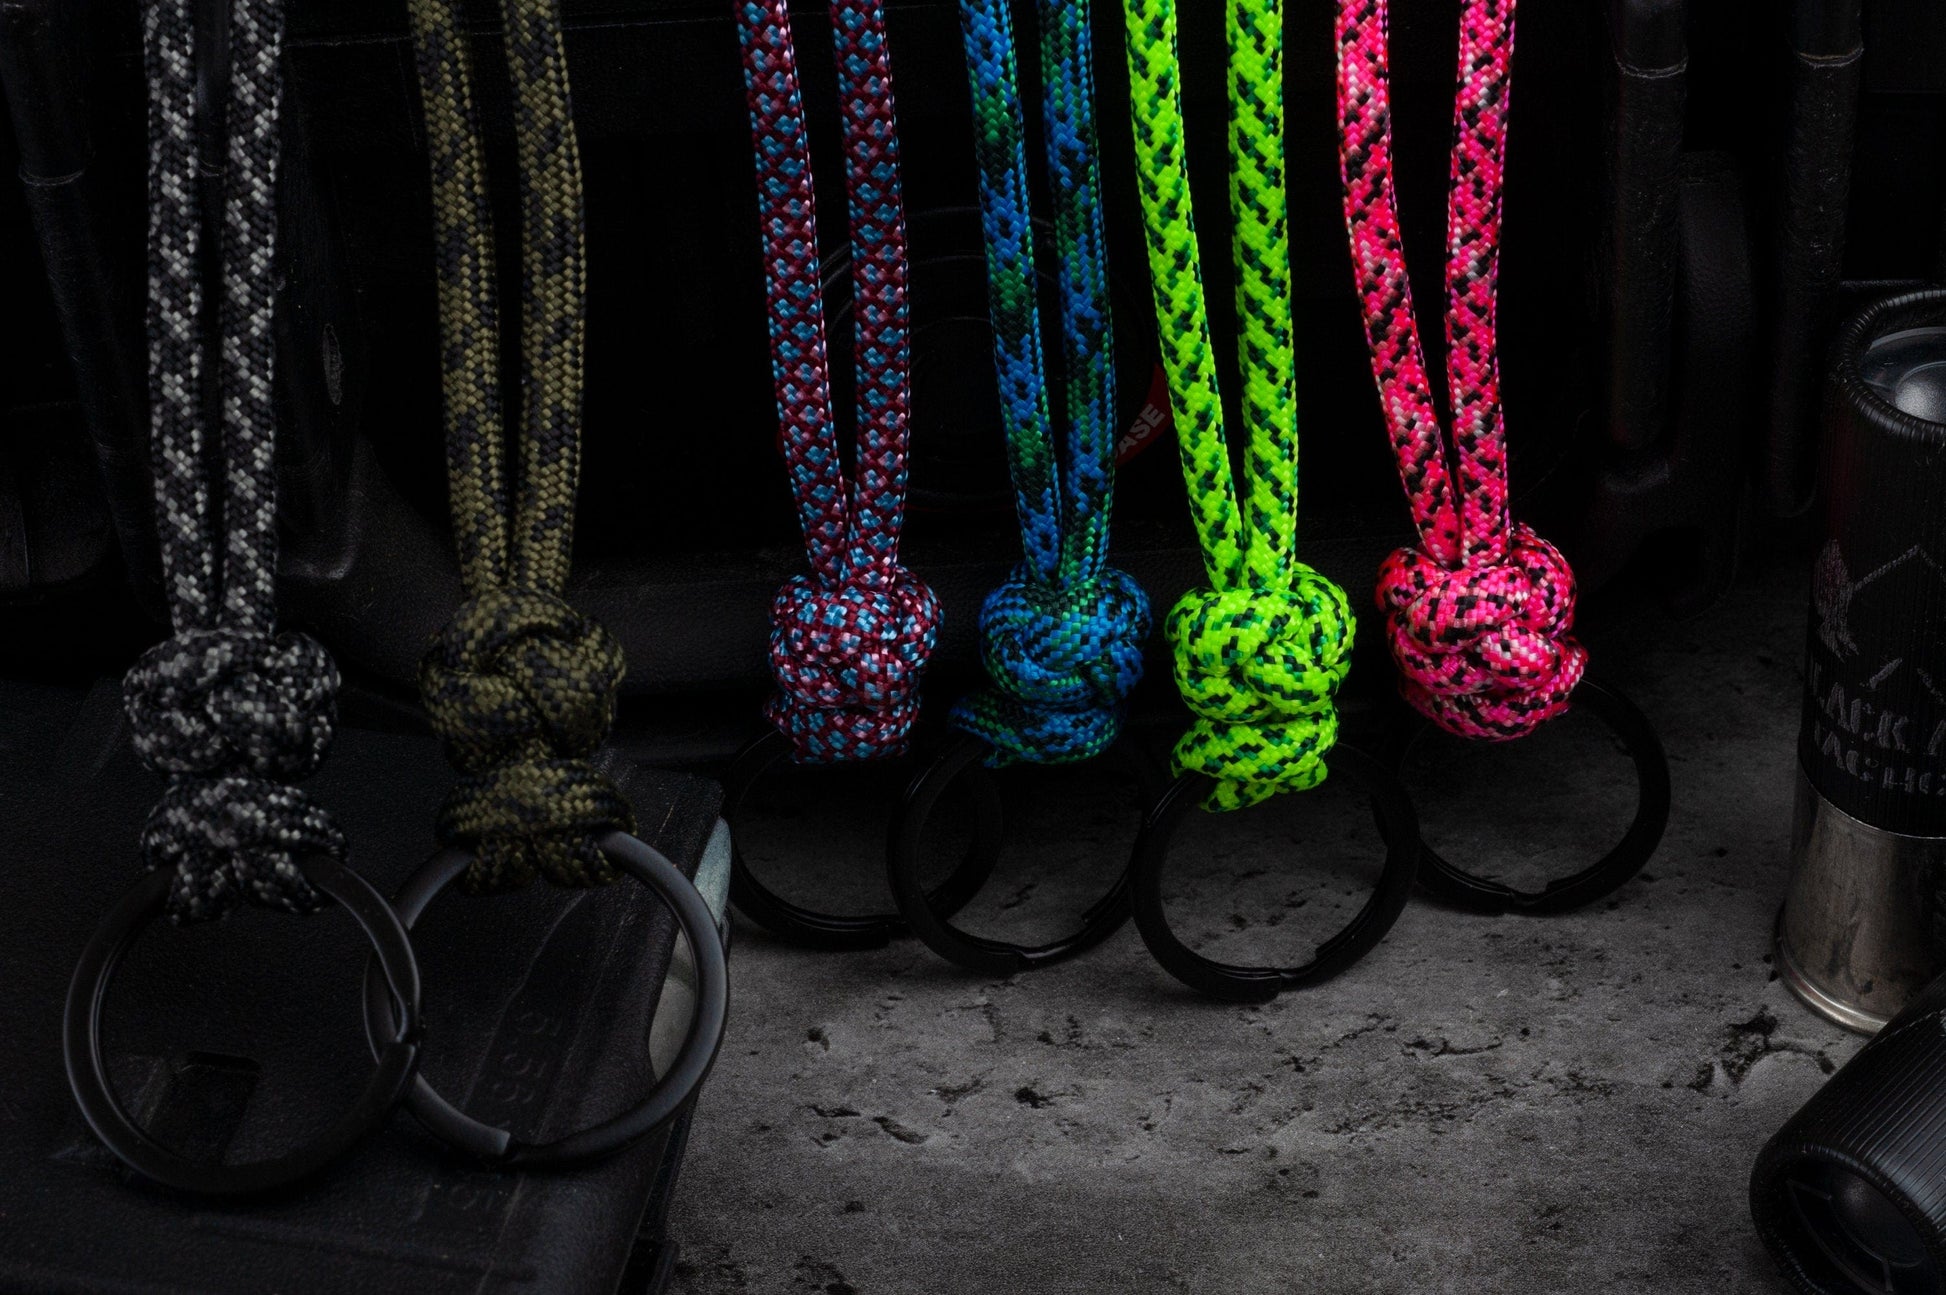 Two Color Paracord ID Lanyard with Breakaway Clasp (Free Badge Holder Included) | Choose from 105 Colors